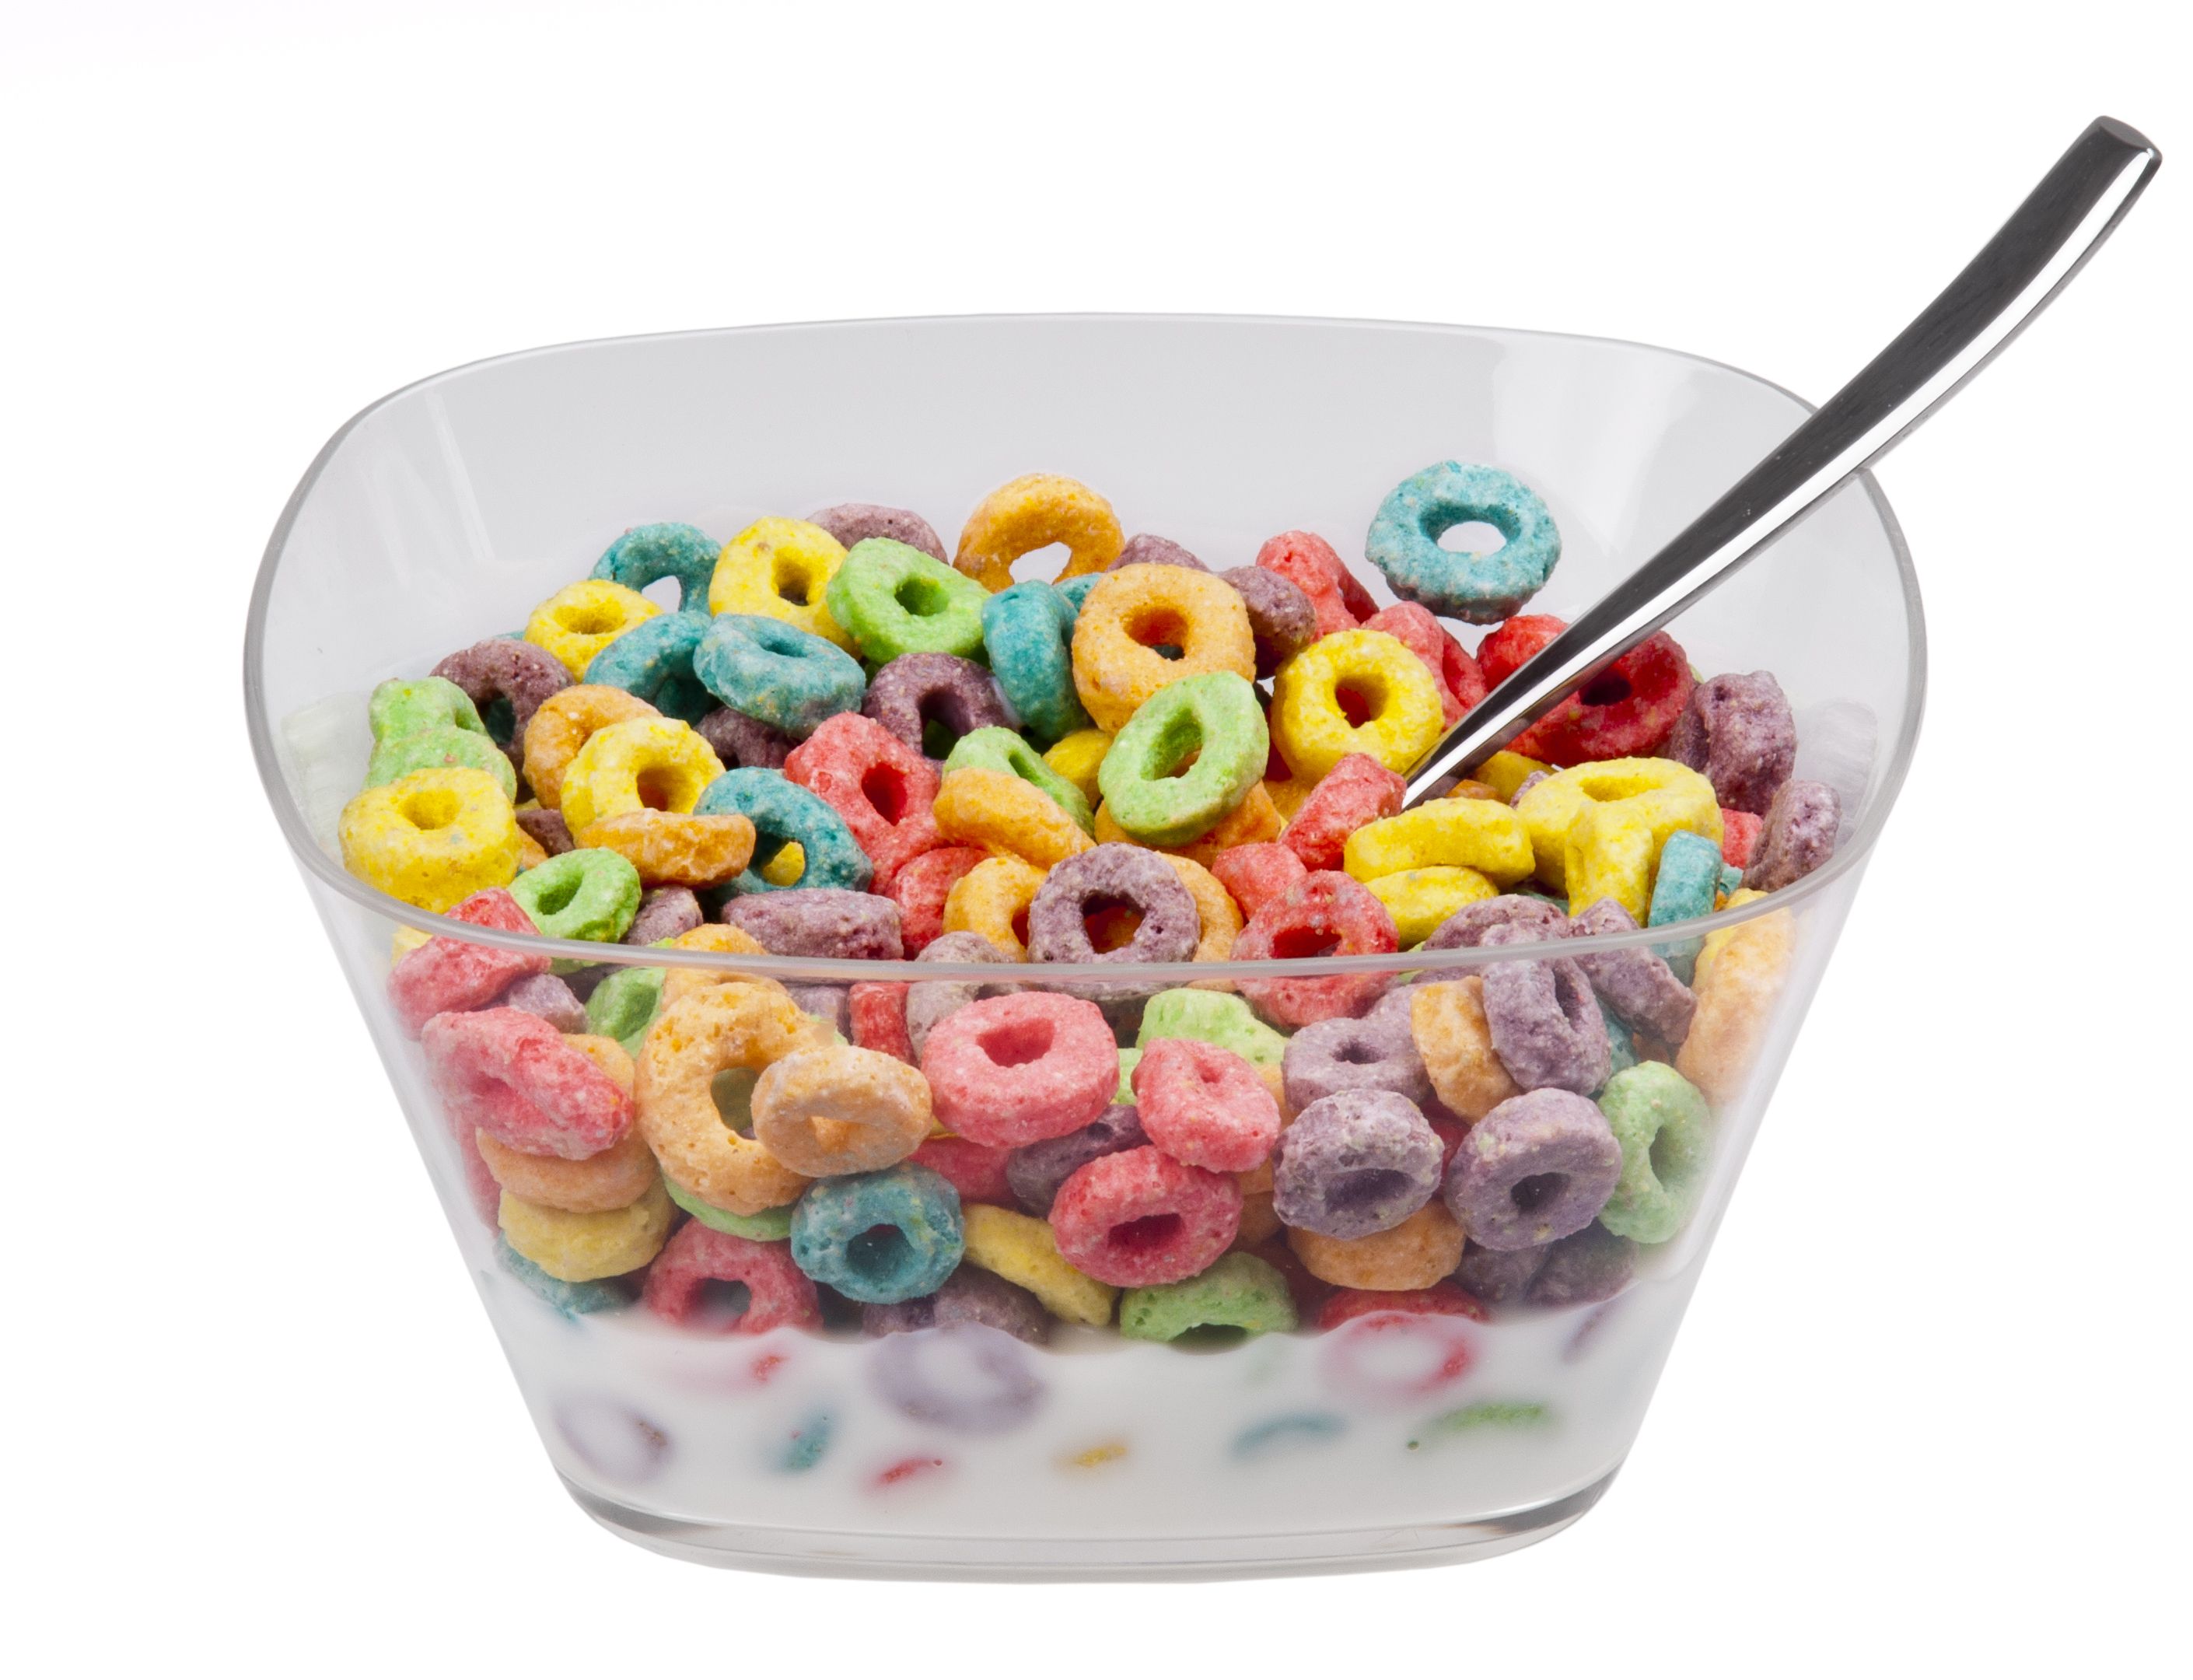 These popular breakfast cereals have more sugar than a scoop of ice cream